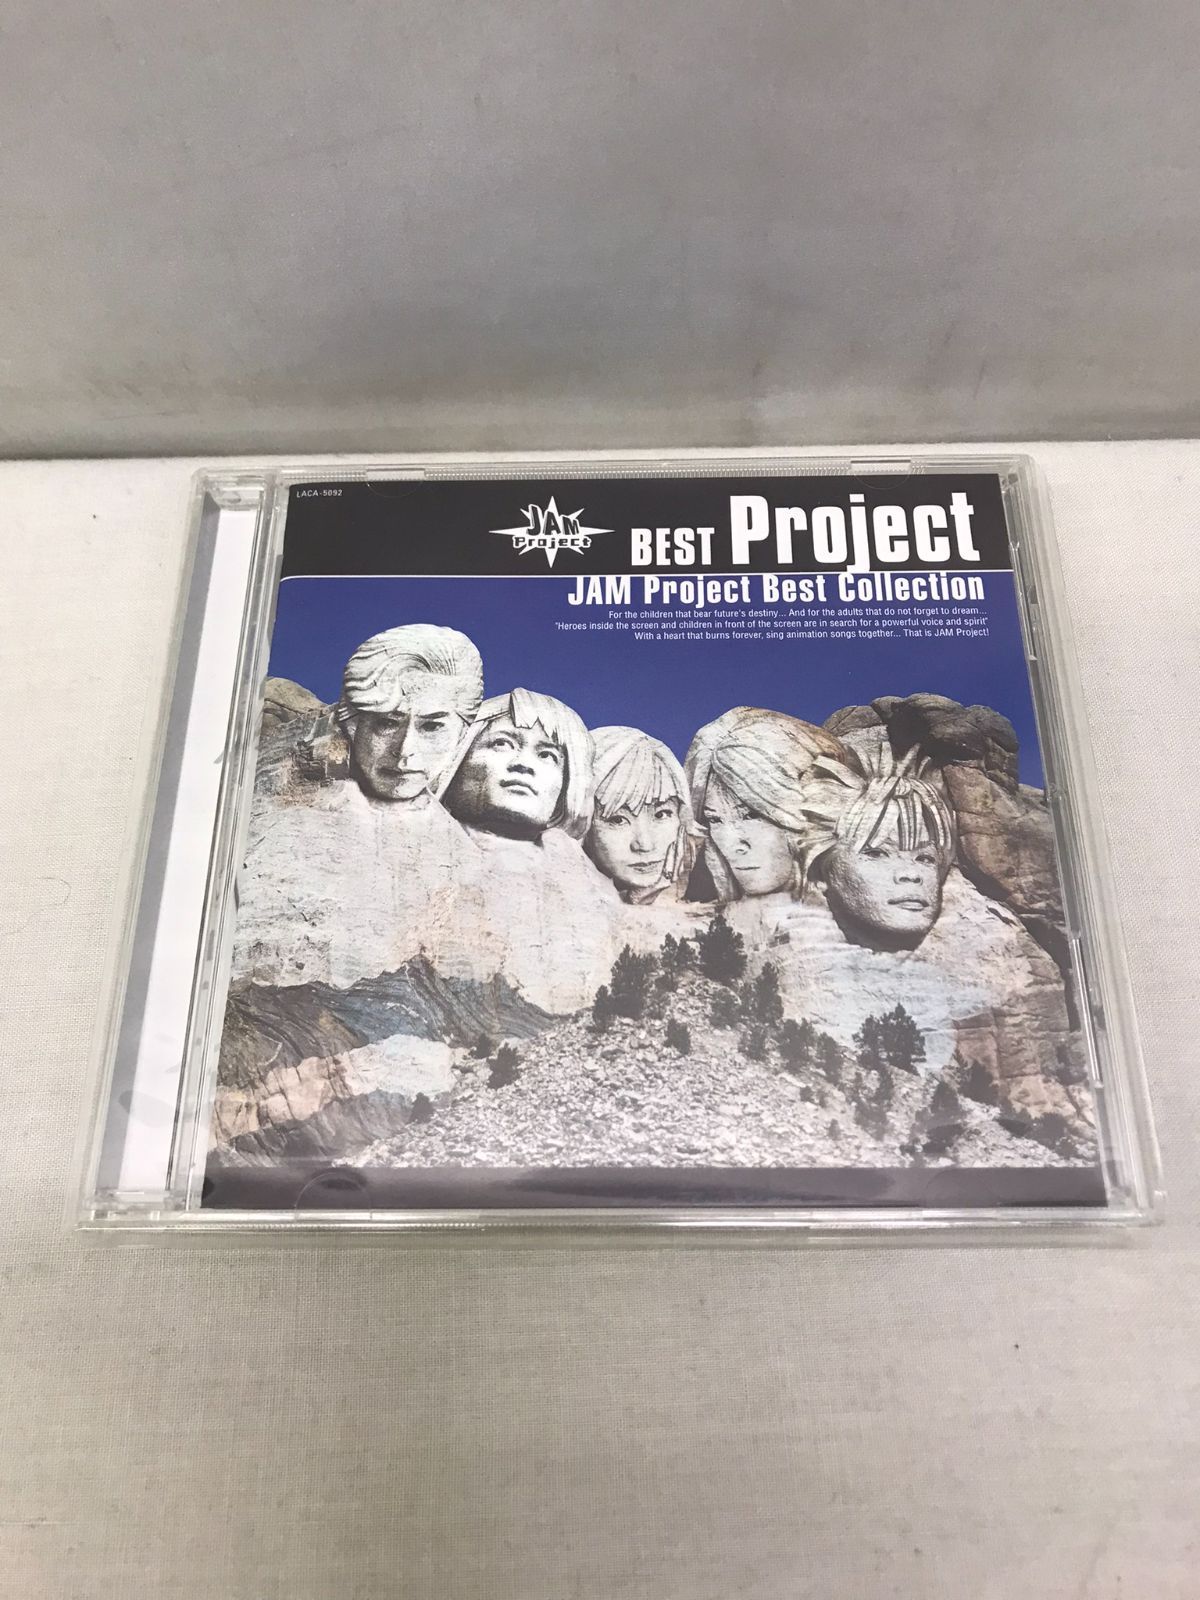 CD】BEST Project ~JAM Project BEST COLLECTION~ JAM Project さかもとえいぞう 松本梨香  水木一郎 影山ヒロノブ 遠藤正明 工藤哲雄 河野陽吾 椎名可憐 須藤賢一 - メルカリ